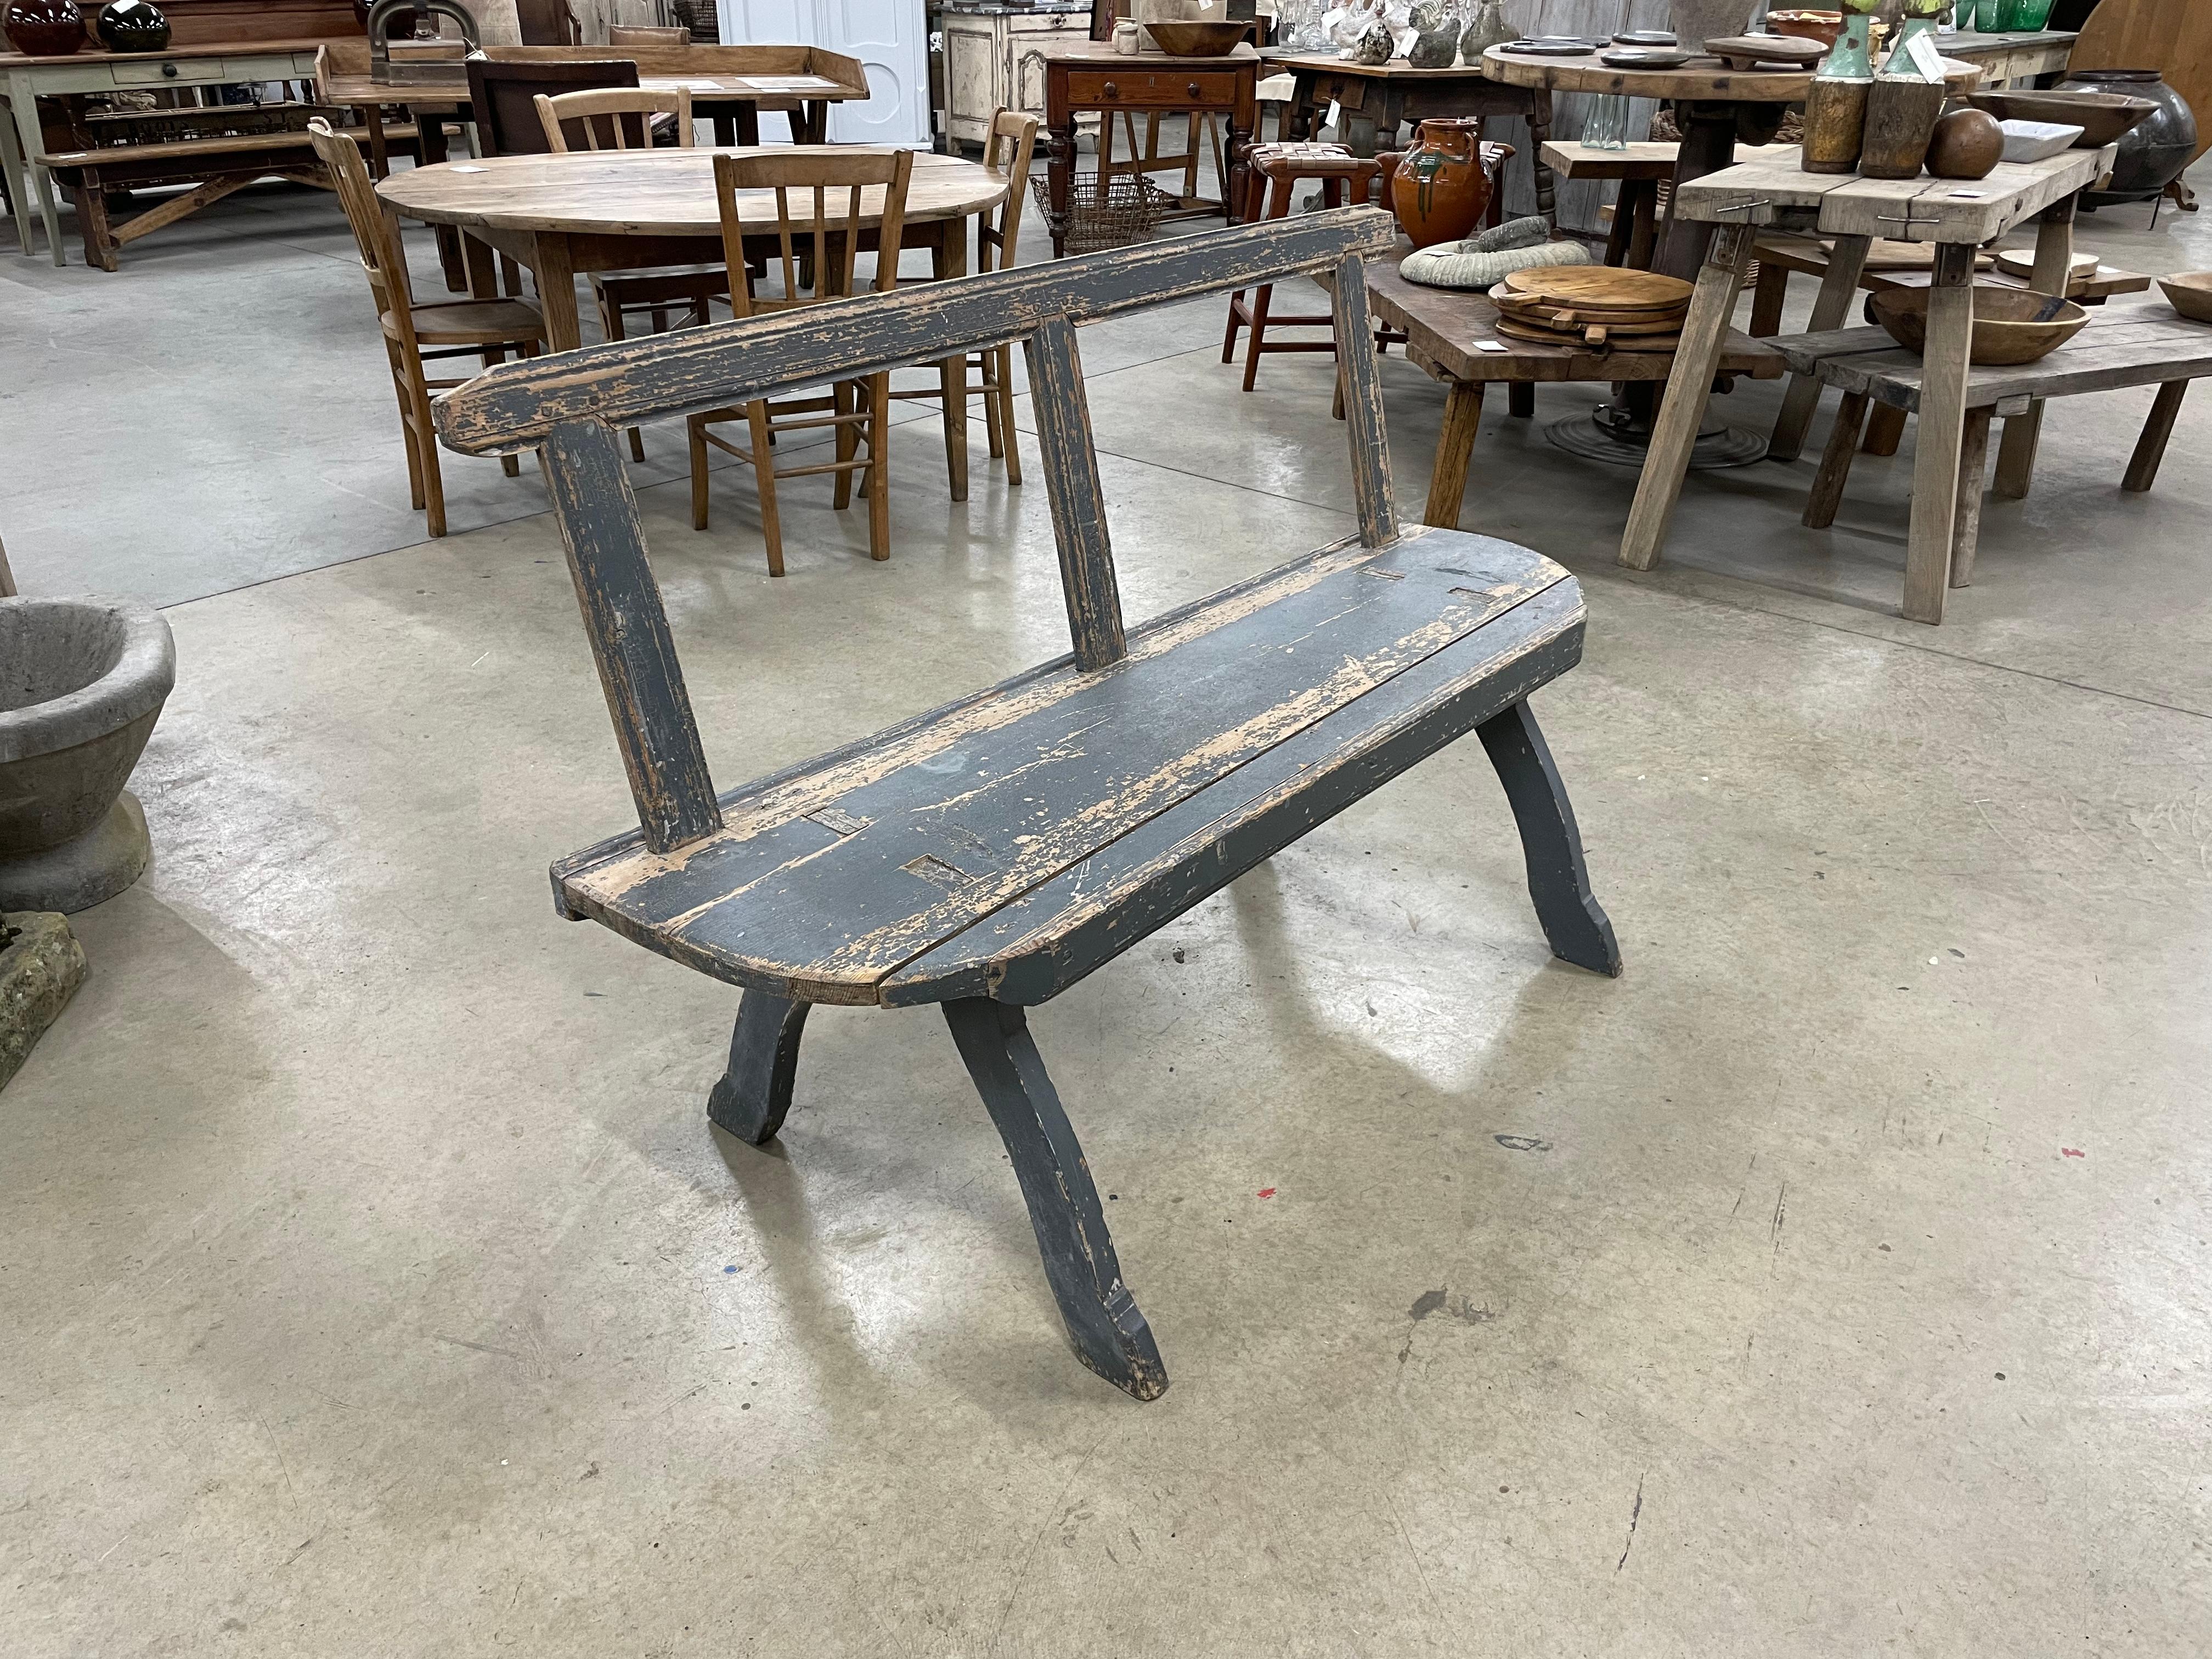 Mid 19th century Gustavian bench from the historic Uppland Provence of Sweden. This primitive bench has an unusual high back, slightly shaped and splayed legs with its original blue paint.

A perfect addition to a Swedish Scandi farmhouse style